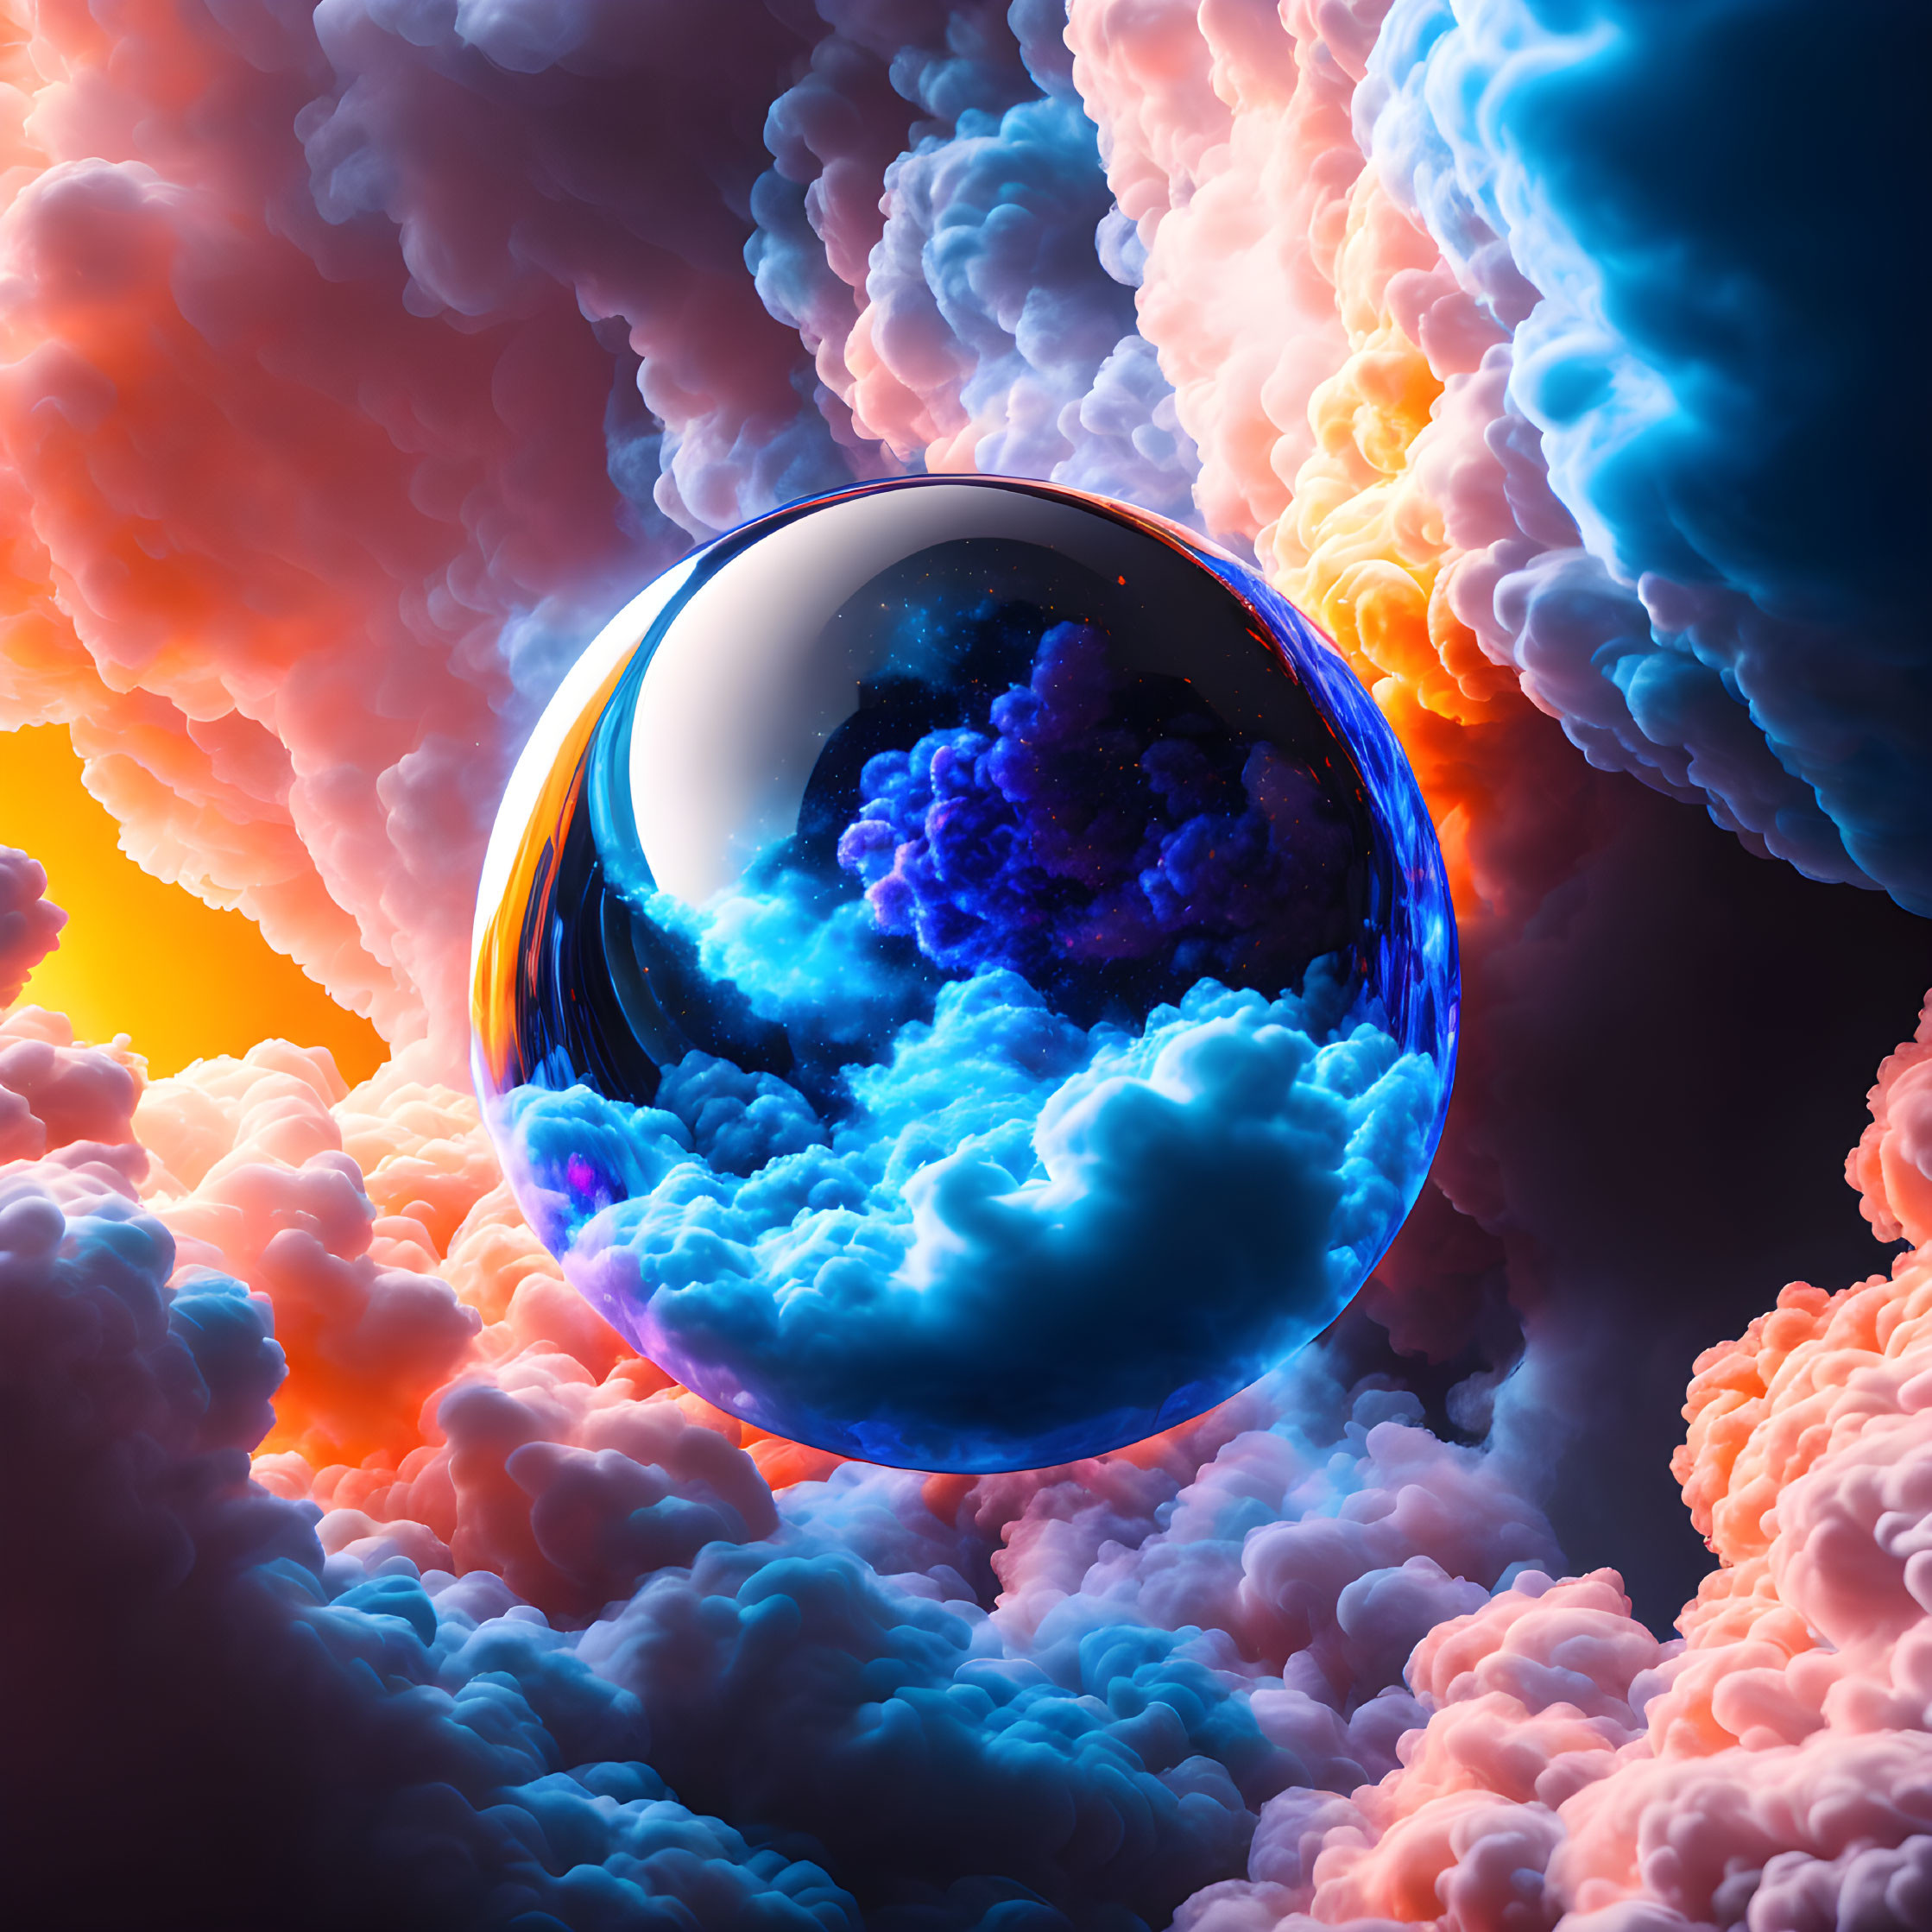 Colorful Bubble Floating in Fiery Orange and Cool Blue Skyscape